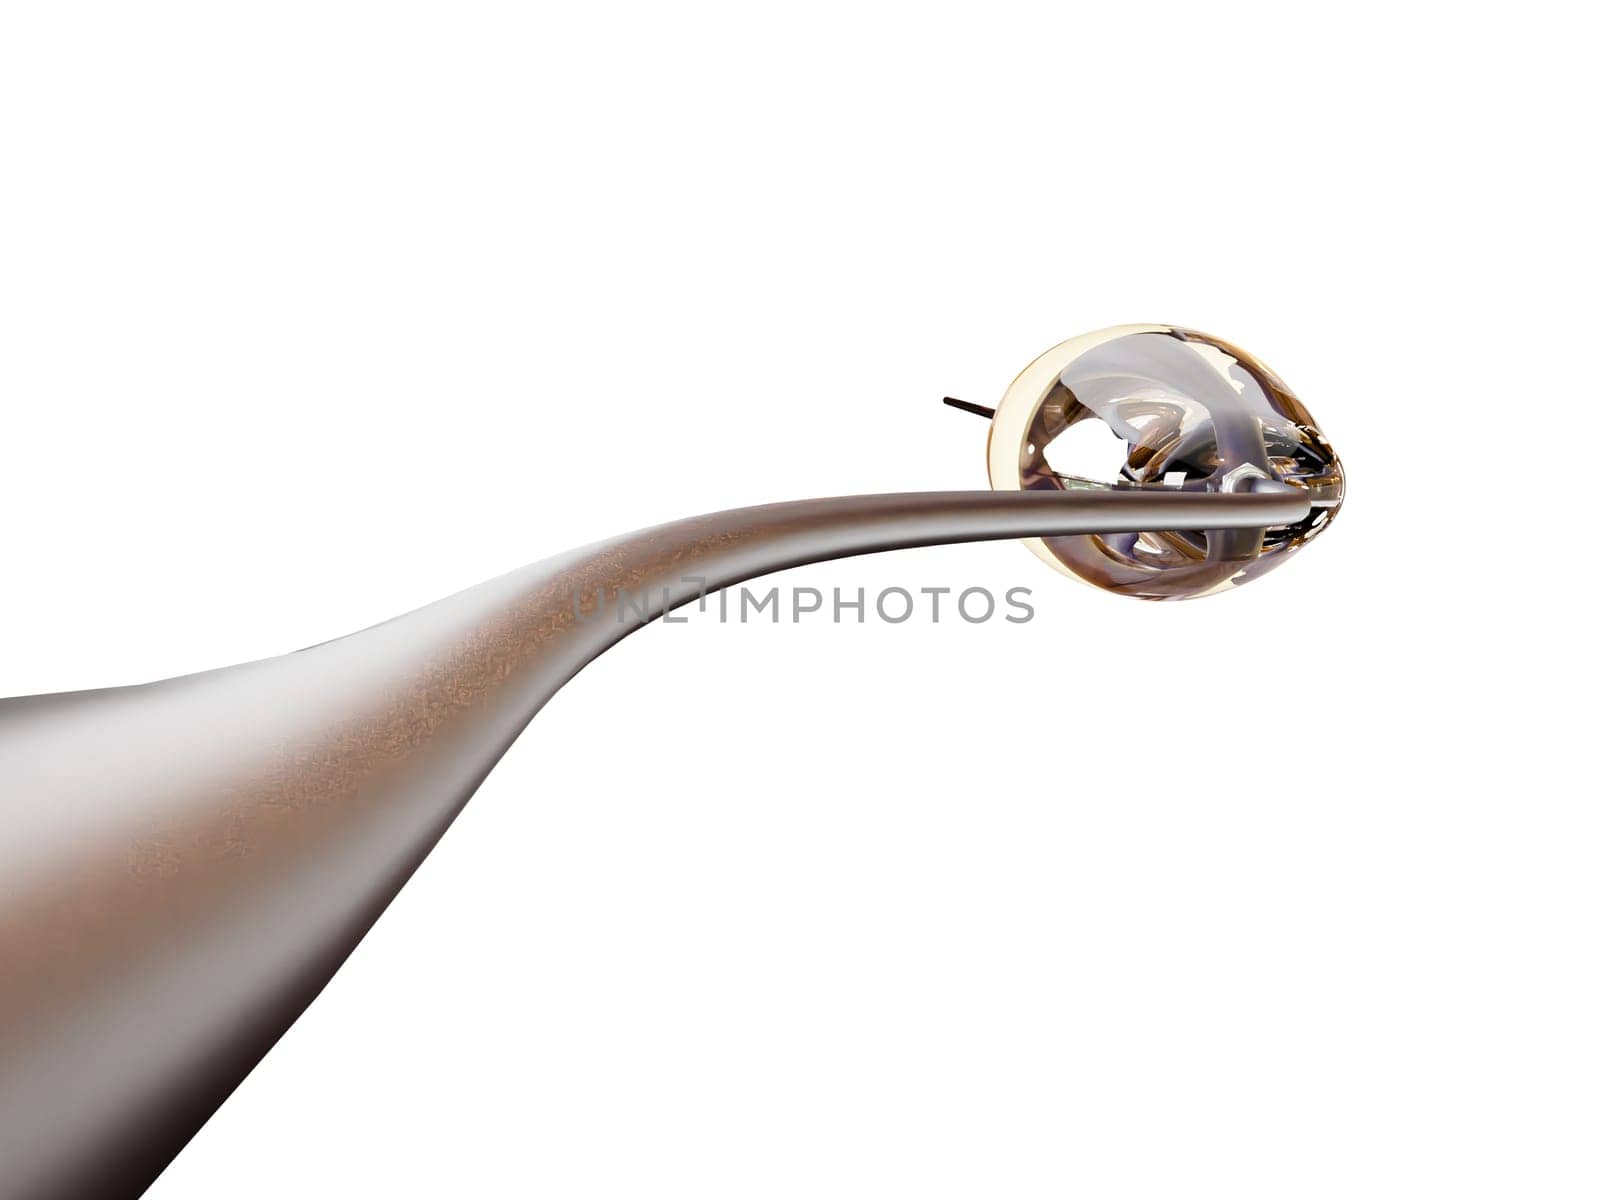 mesh metal nitinol self-expandable stent 3D rendering for endovascular surgery isolated on white background. Clipping path. by samunella